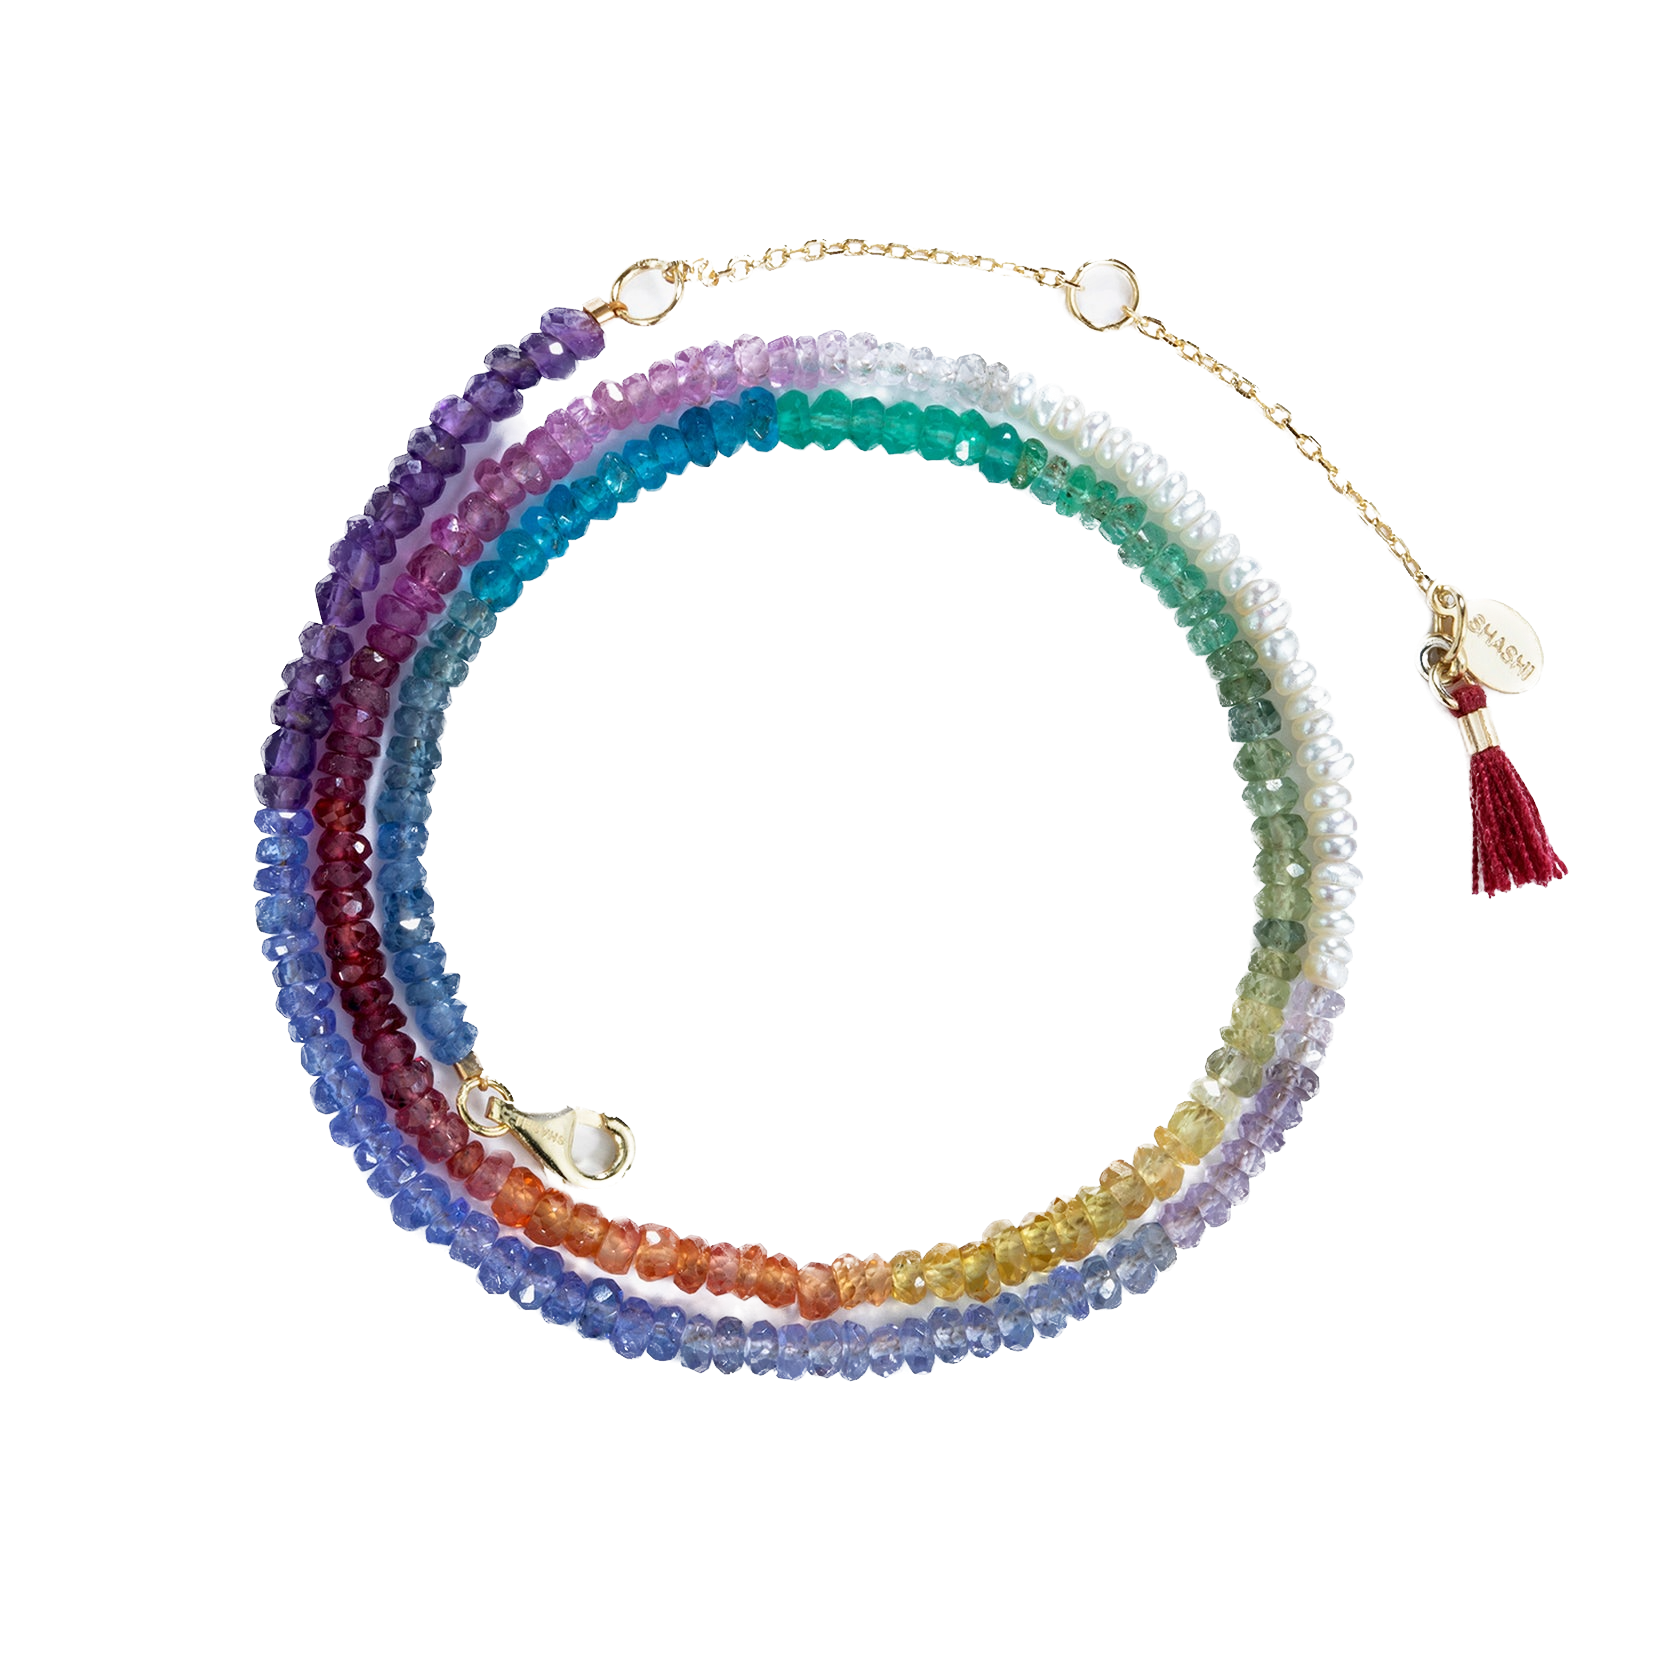 duo-jewellery-necklaces-yellow-gold-aisha-rainbow-pearl-necklace-41464730124539